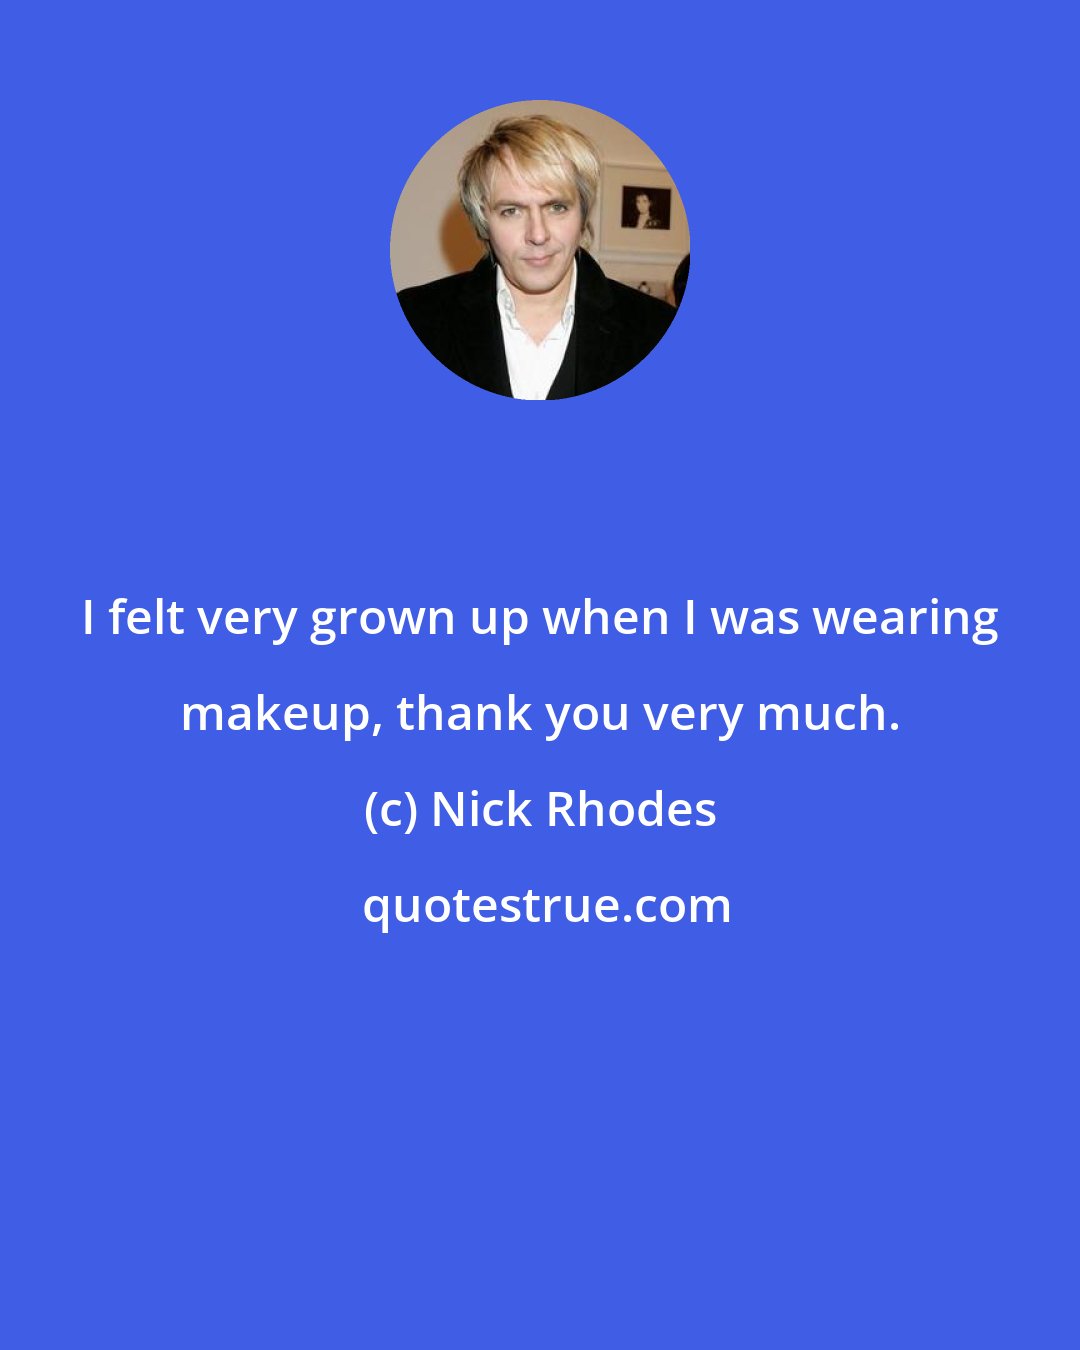 Nick Rhodes: I felt very grown up when I was wearing makeup, thank you very much.